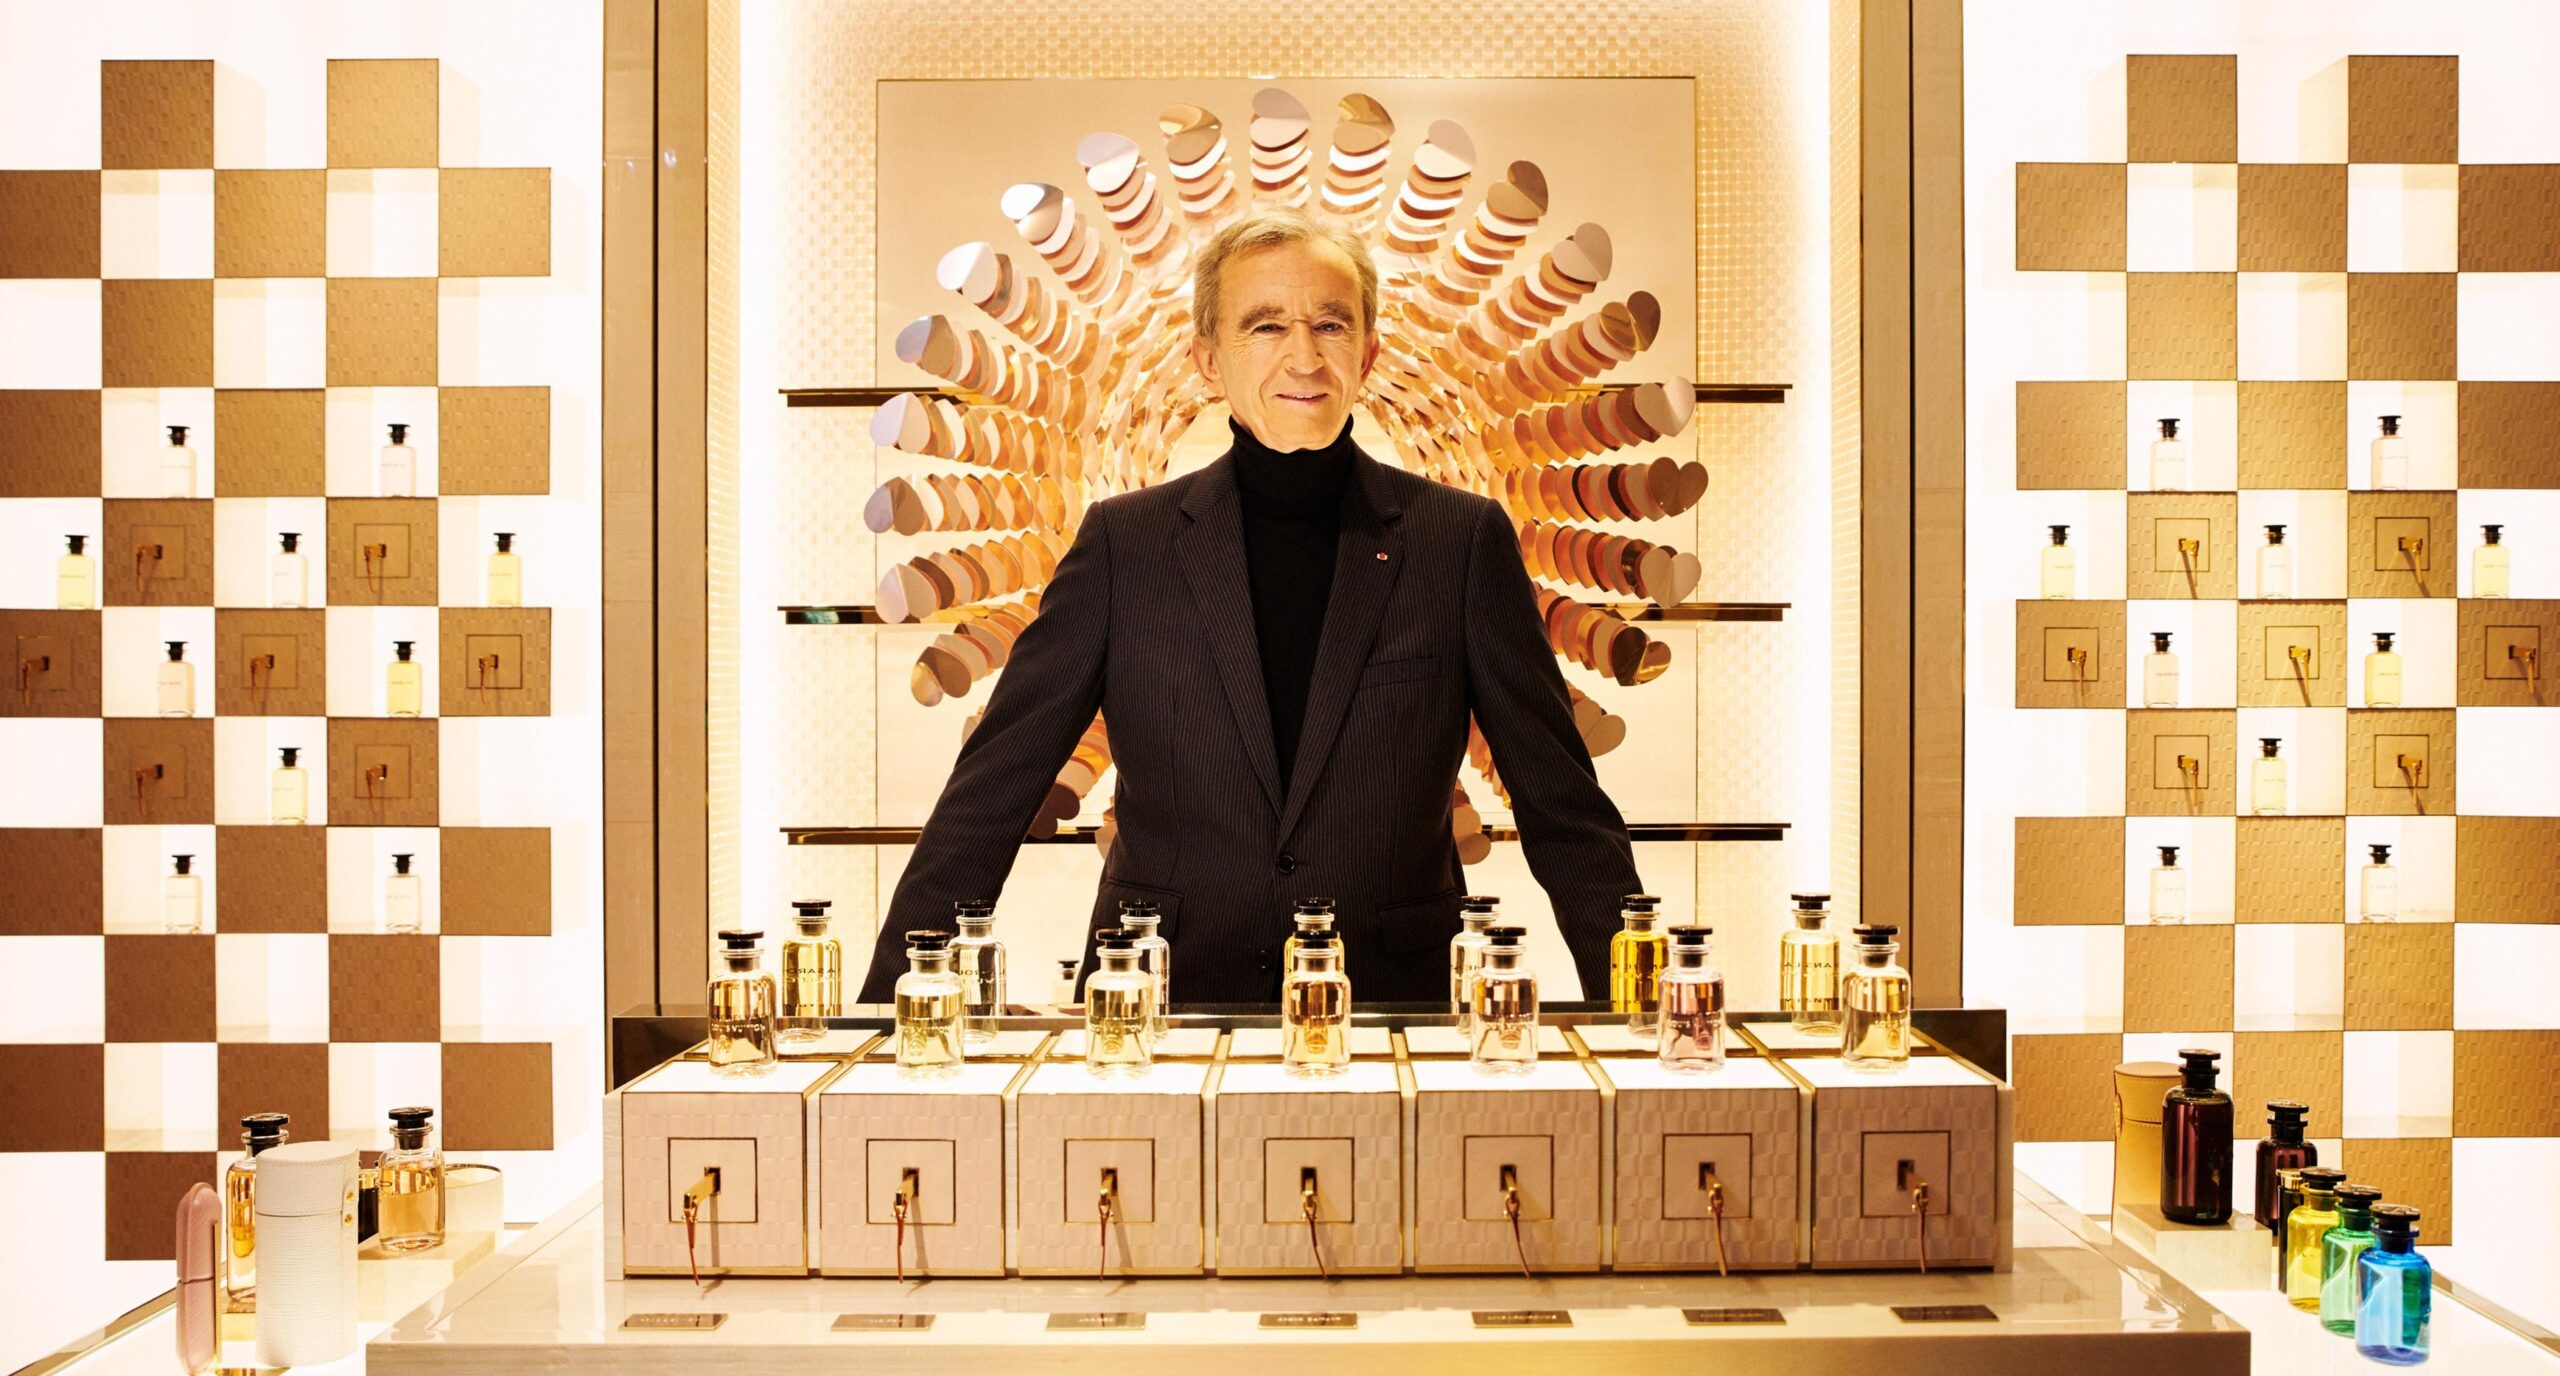 LVMH, The Luxury Goods Conglomerate, Creates History By Being The